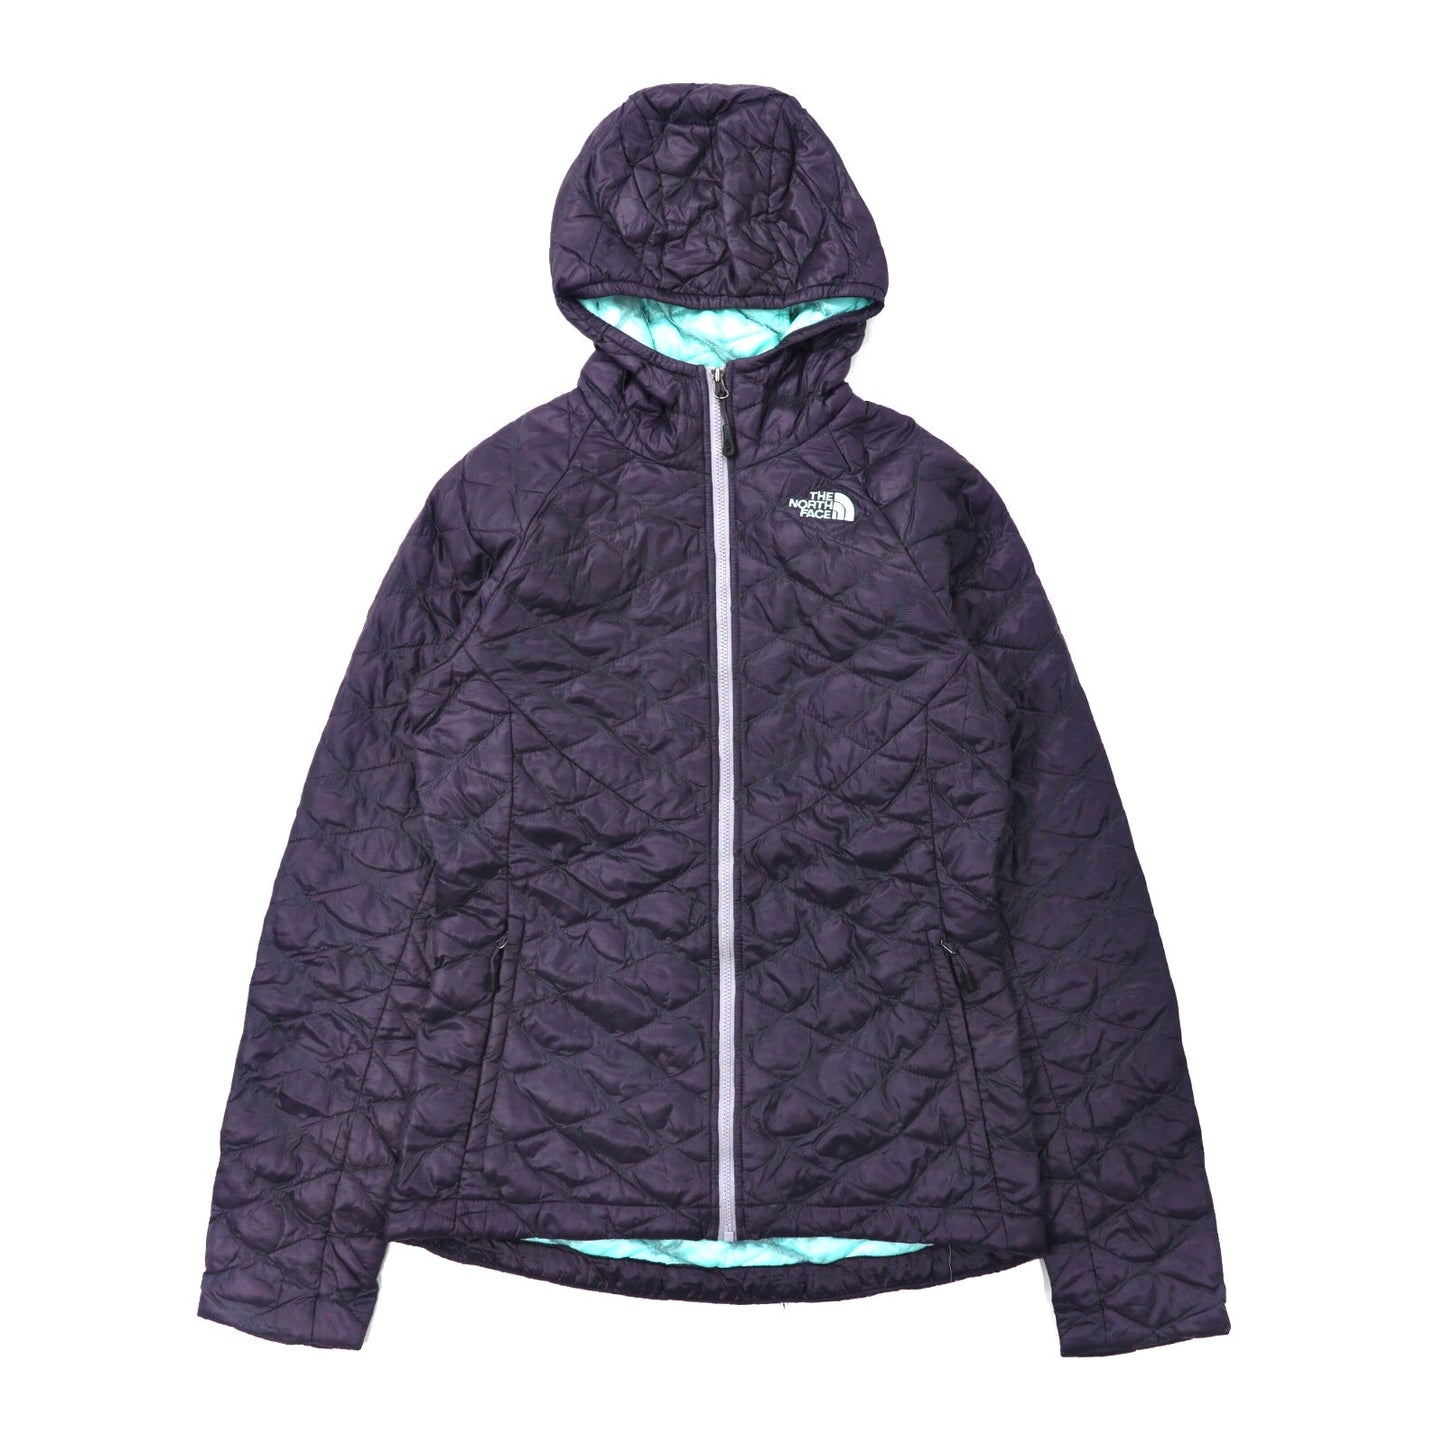 THE NORTH FACE キルティングナイロンパーカー XS パープル ナイロン-THE NORTH FACE-古着